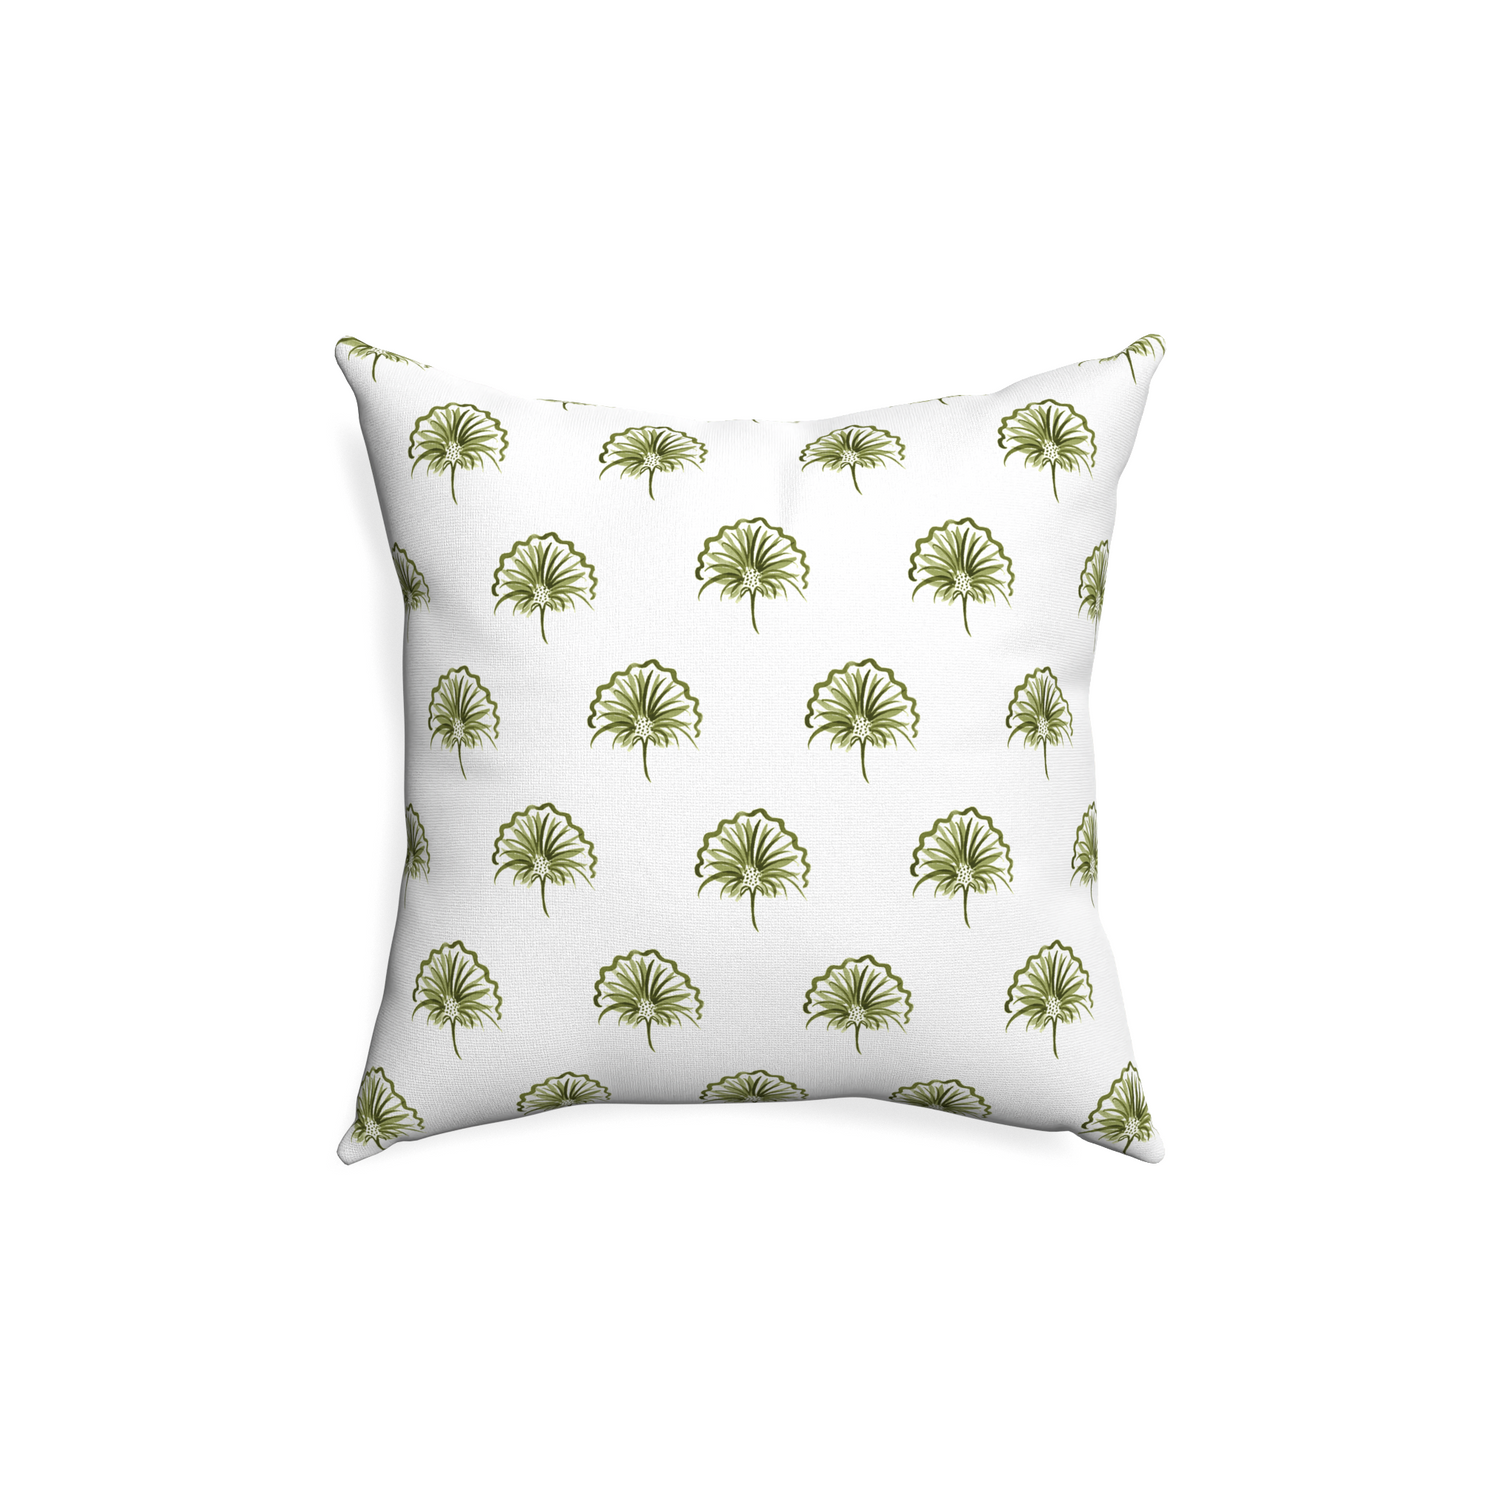 18-square penelope moss custom green floralpillow with none on white background